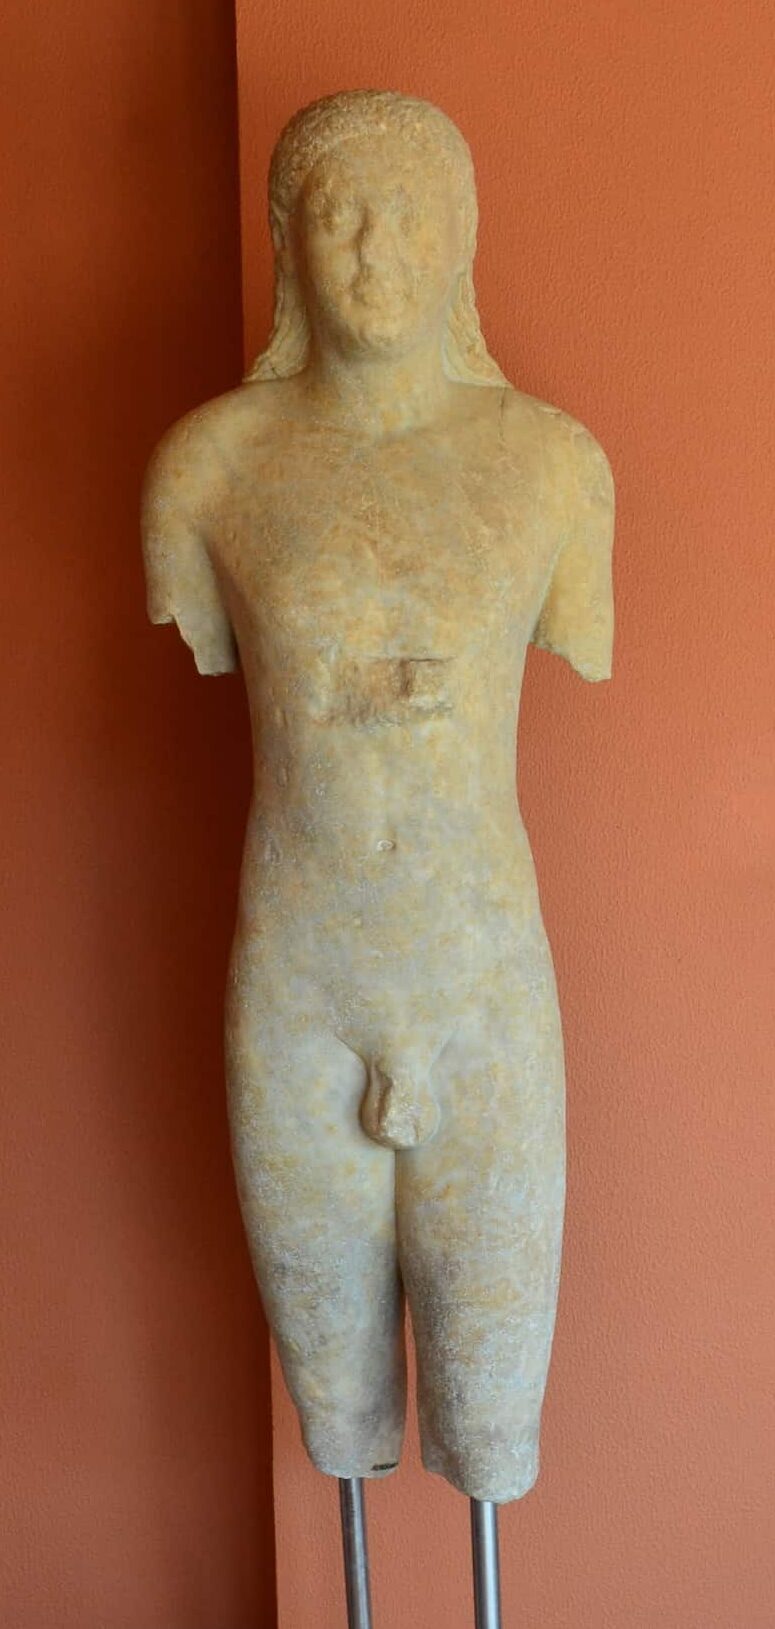 Kouros (marble, 6th century BC) in the courtyard at the Ephesus Museum in Selçuk, Turkey